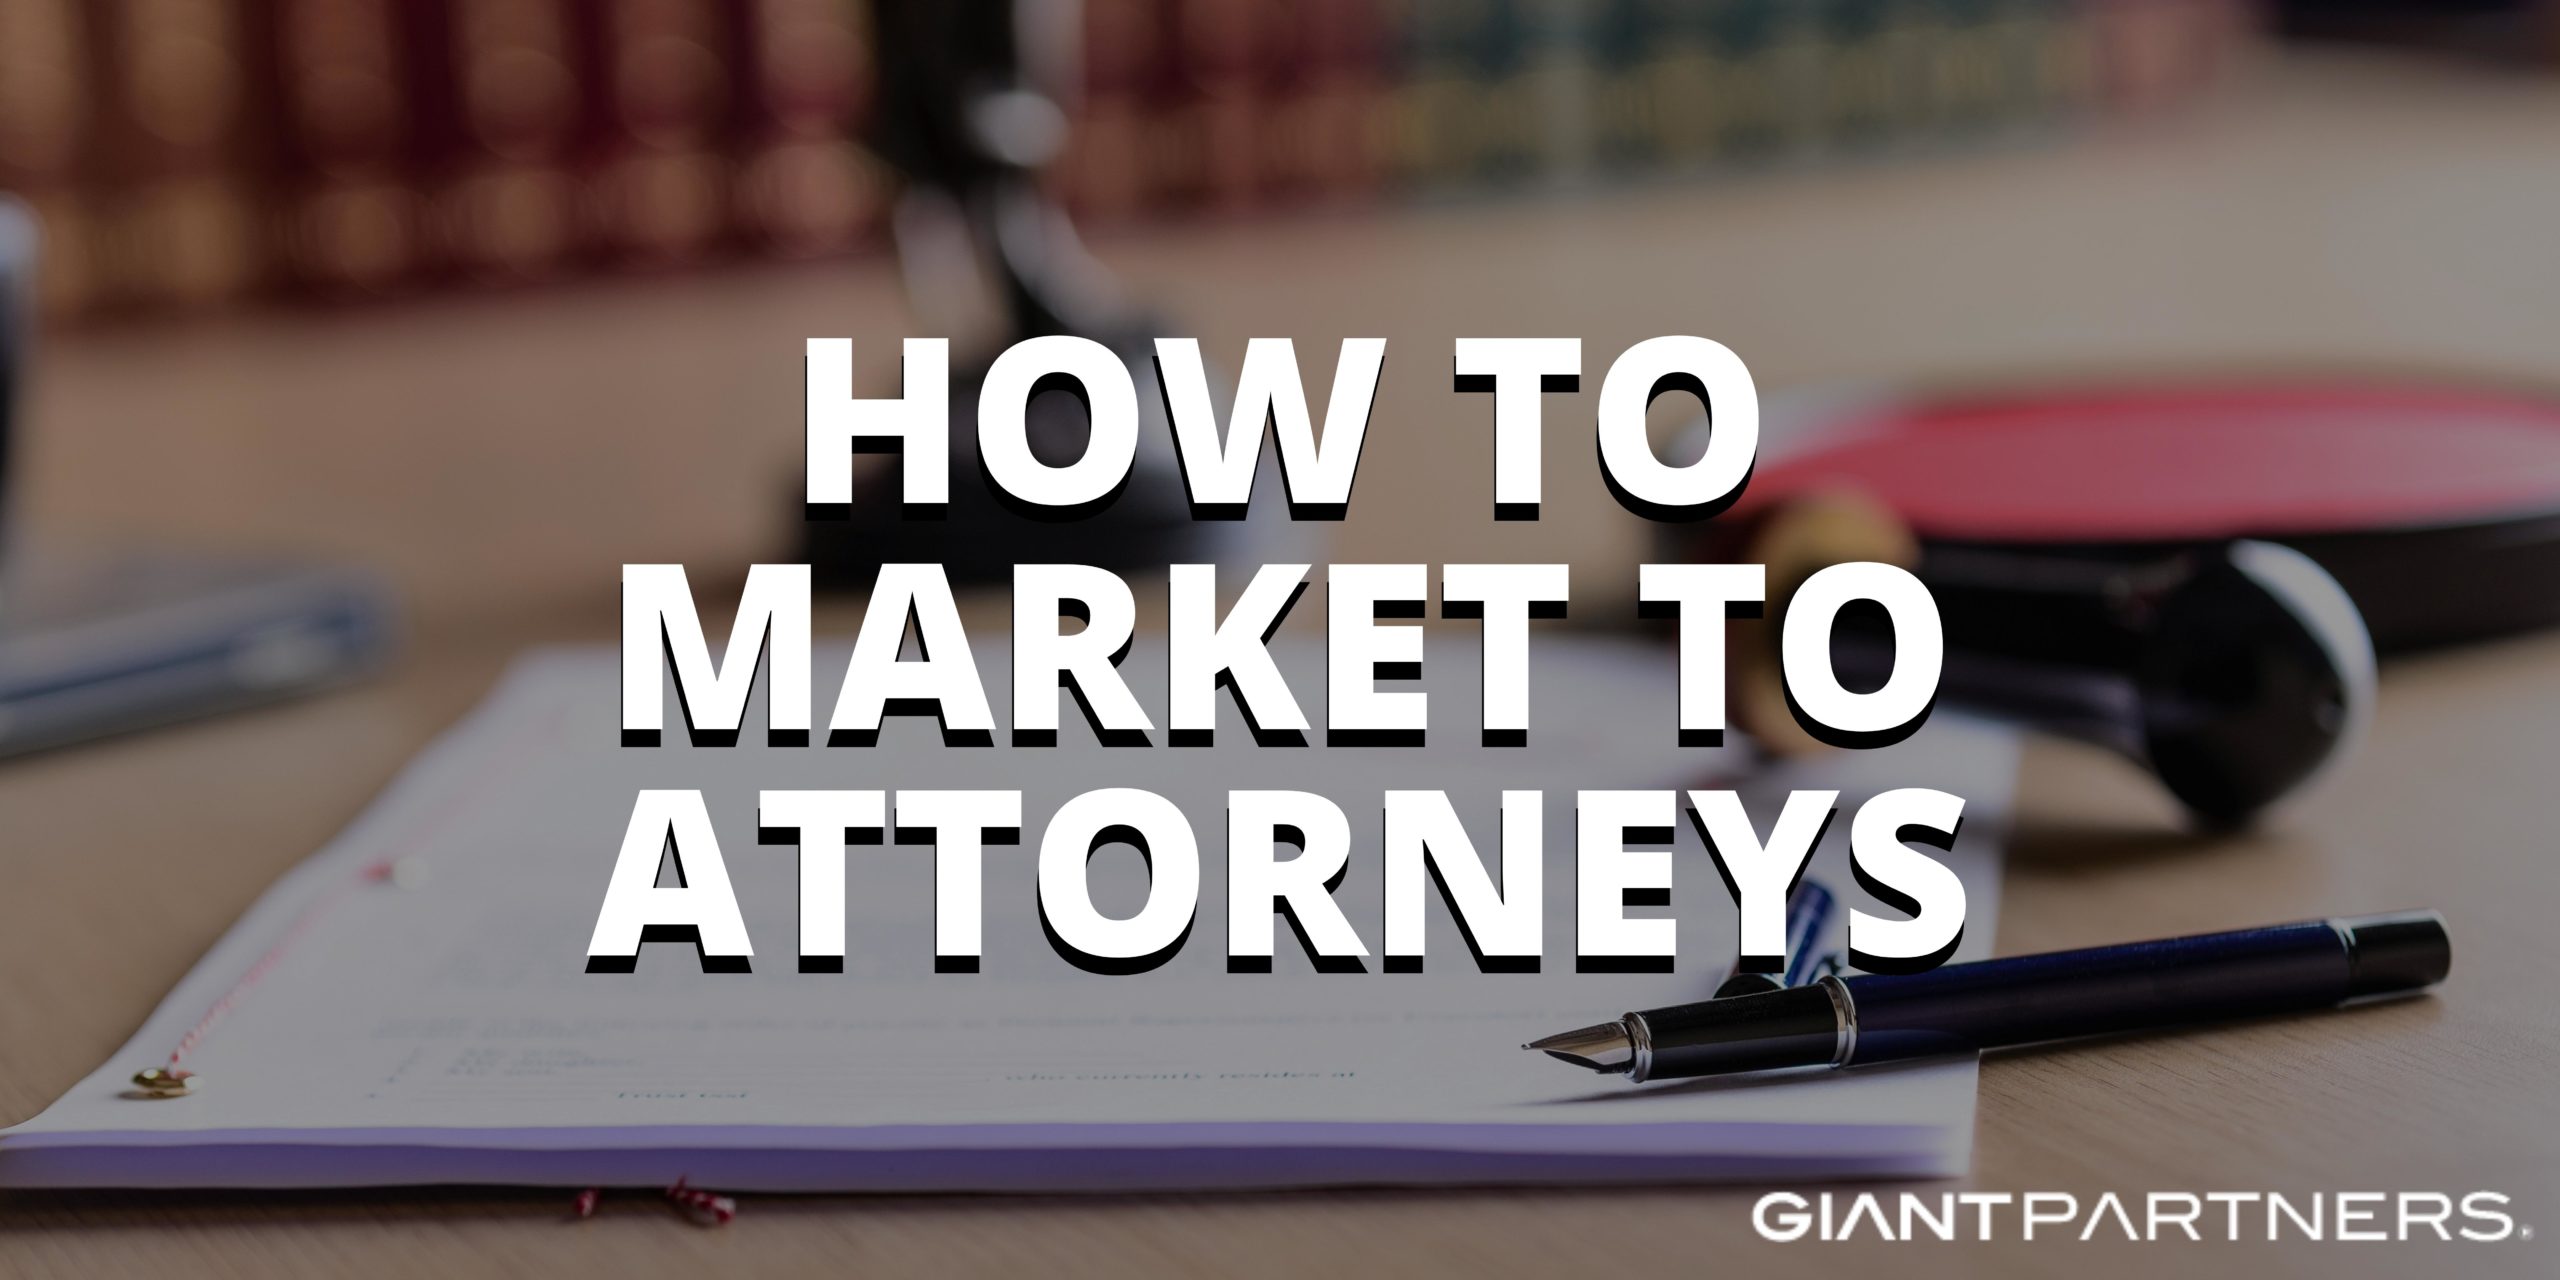 How To Market to Attorneys